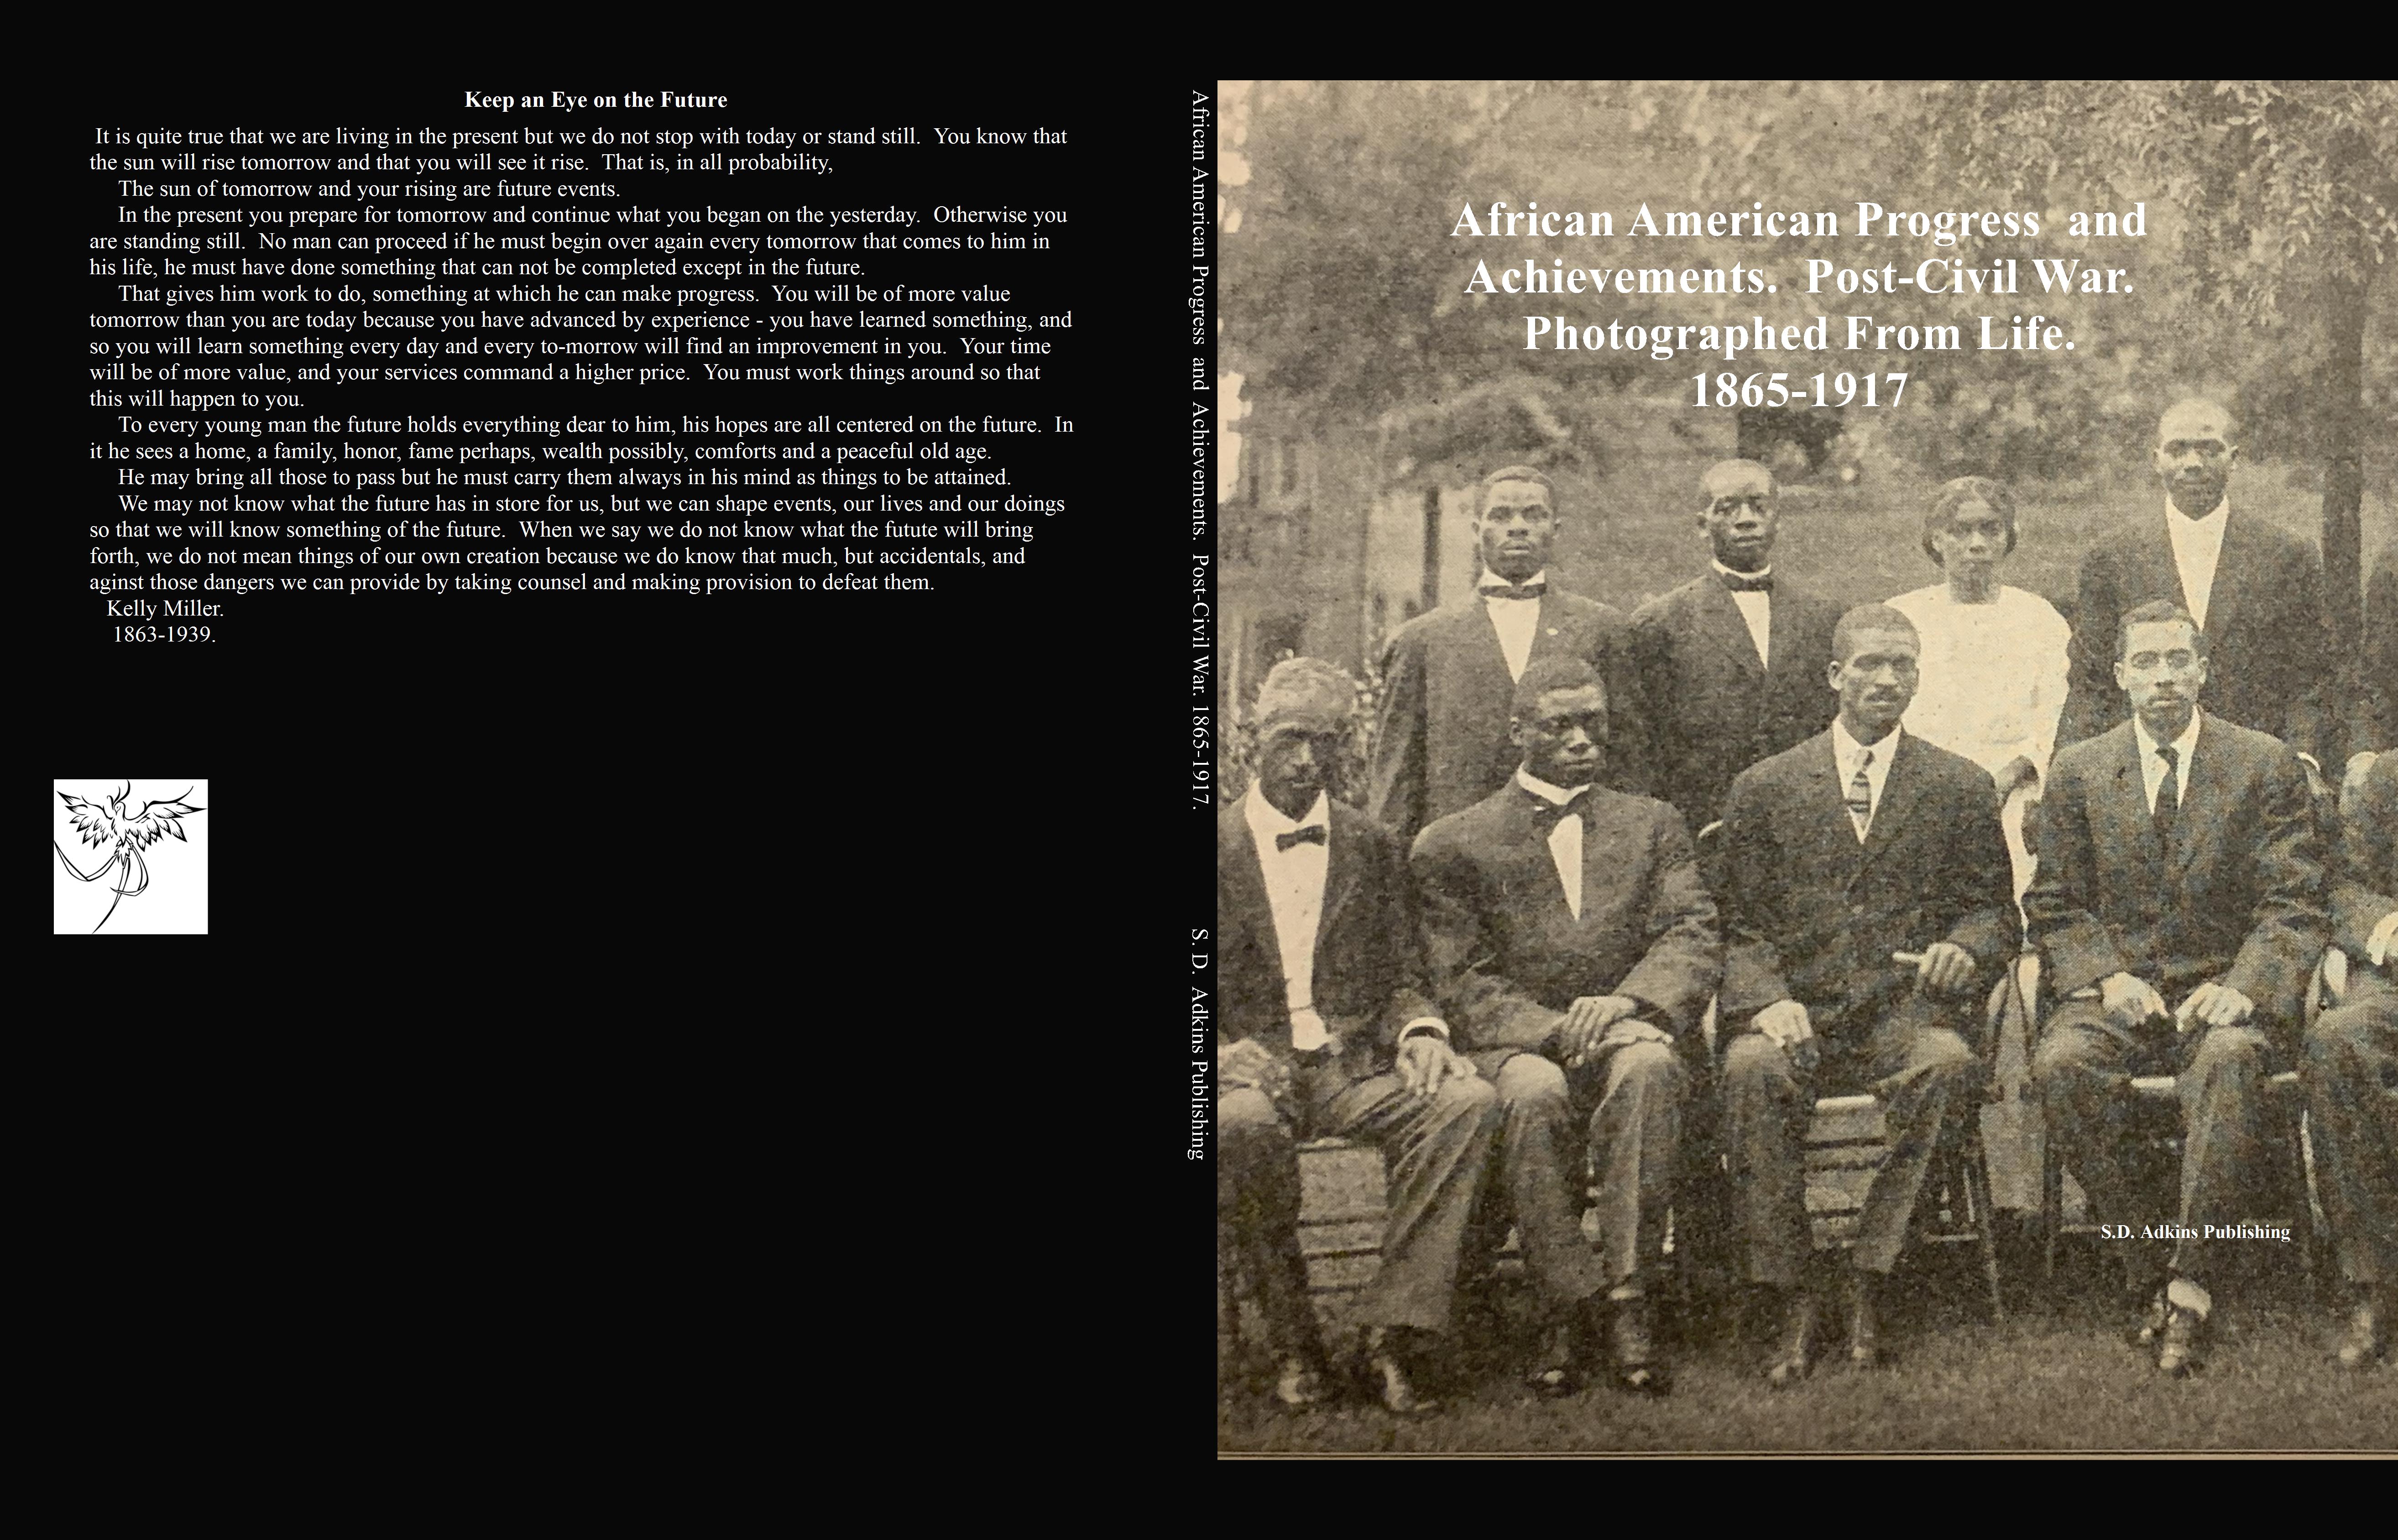 African American Progress And Achievements Photographed From Life.  Post-Civil War. 1865-1917. cover image